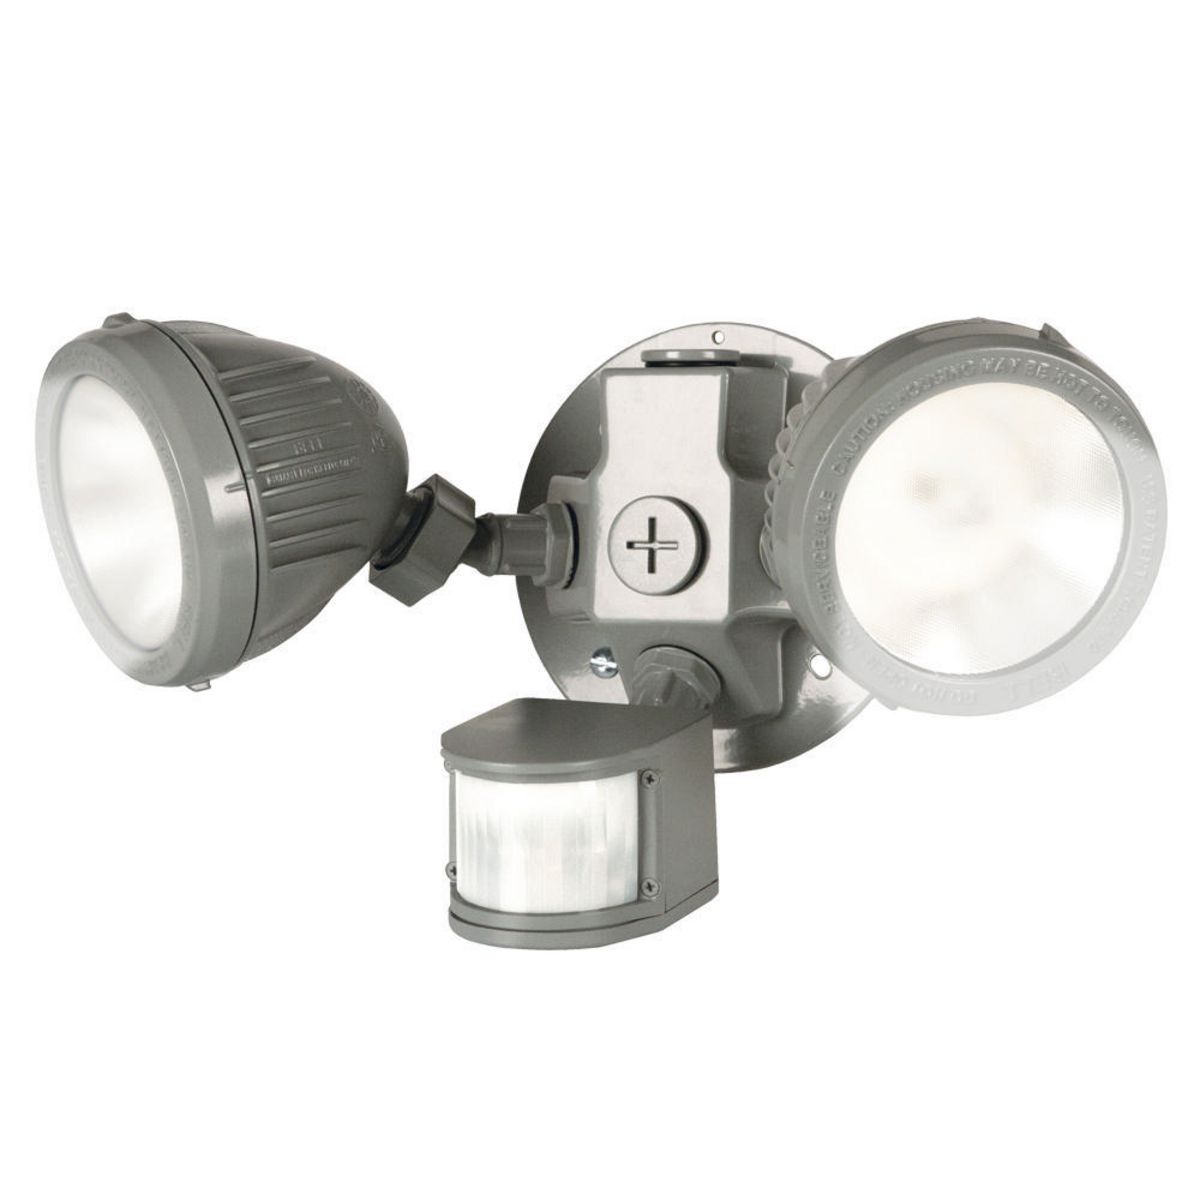 2 LED Lampholders with Round Box, Cover with Motion Sensor, Gray